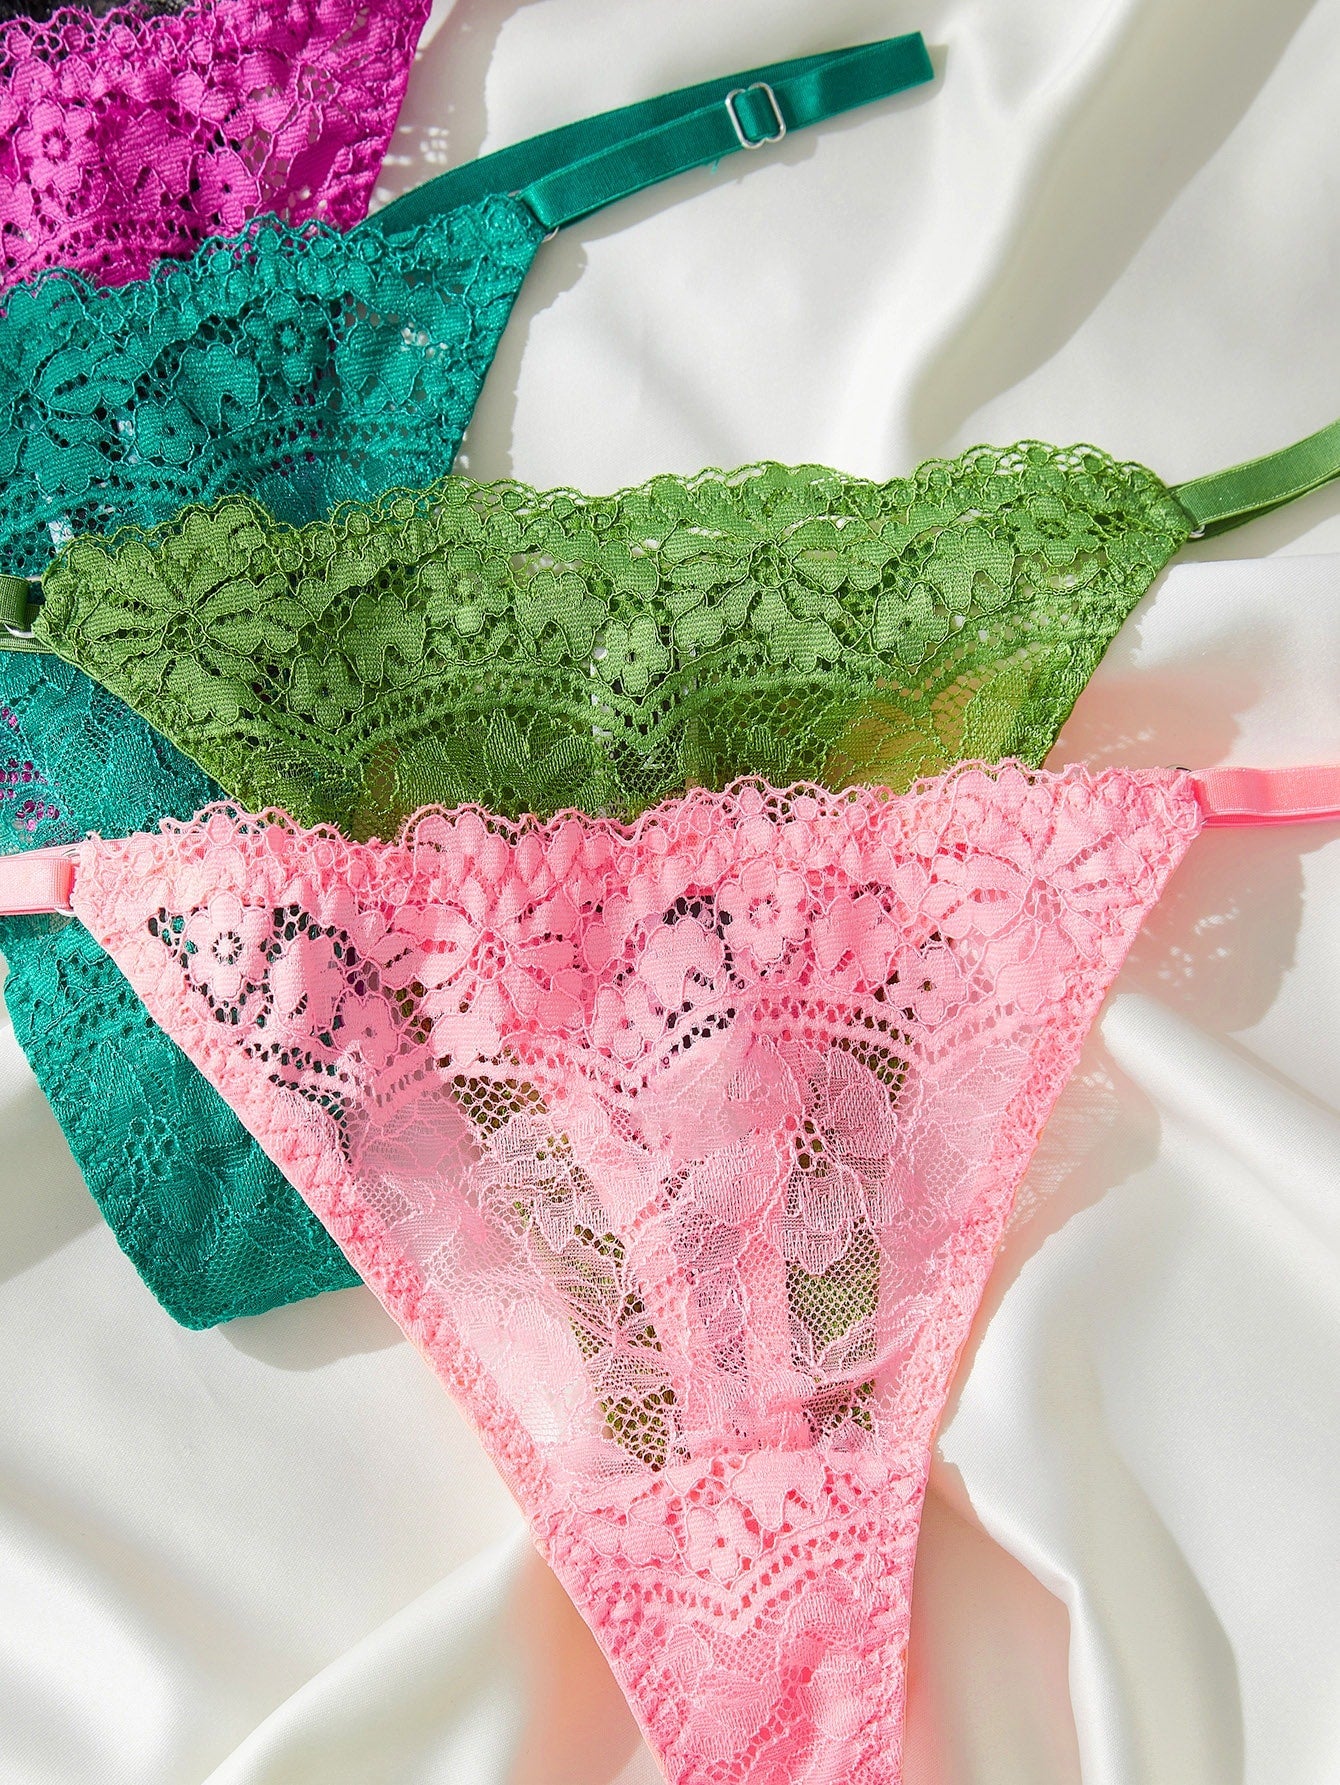 5pack Floral Lace Crotchless Thong Set